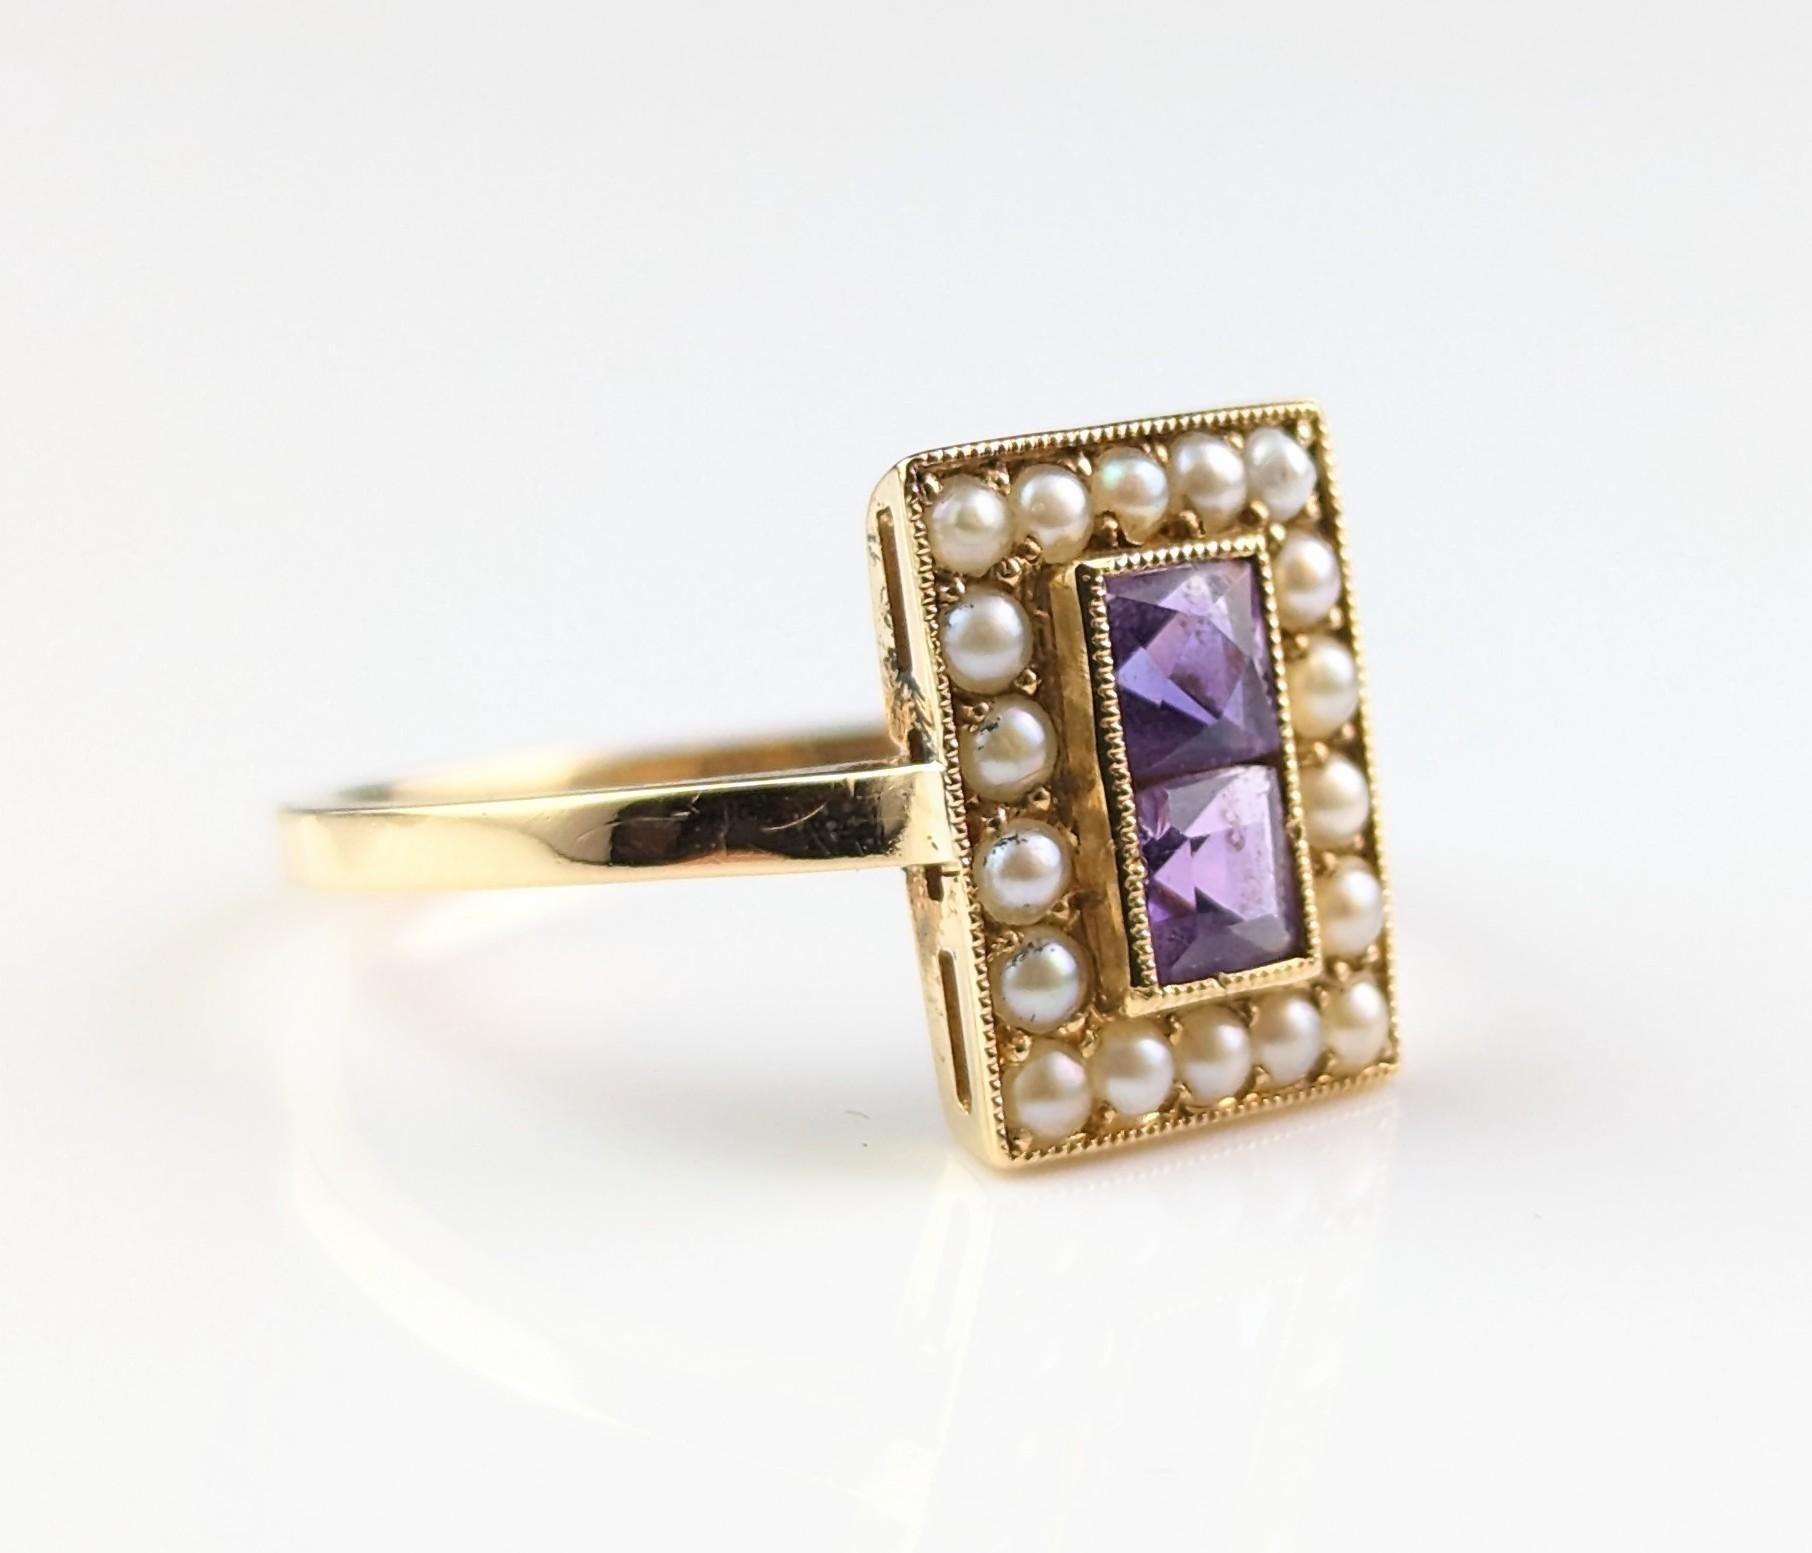 Antique Art Deco Amethyst and Seed pearl ring, 18k yellow gold  9